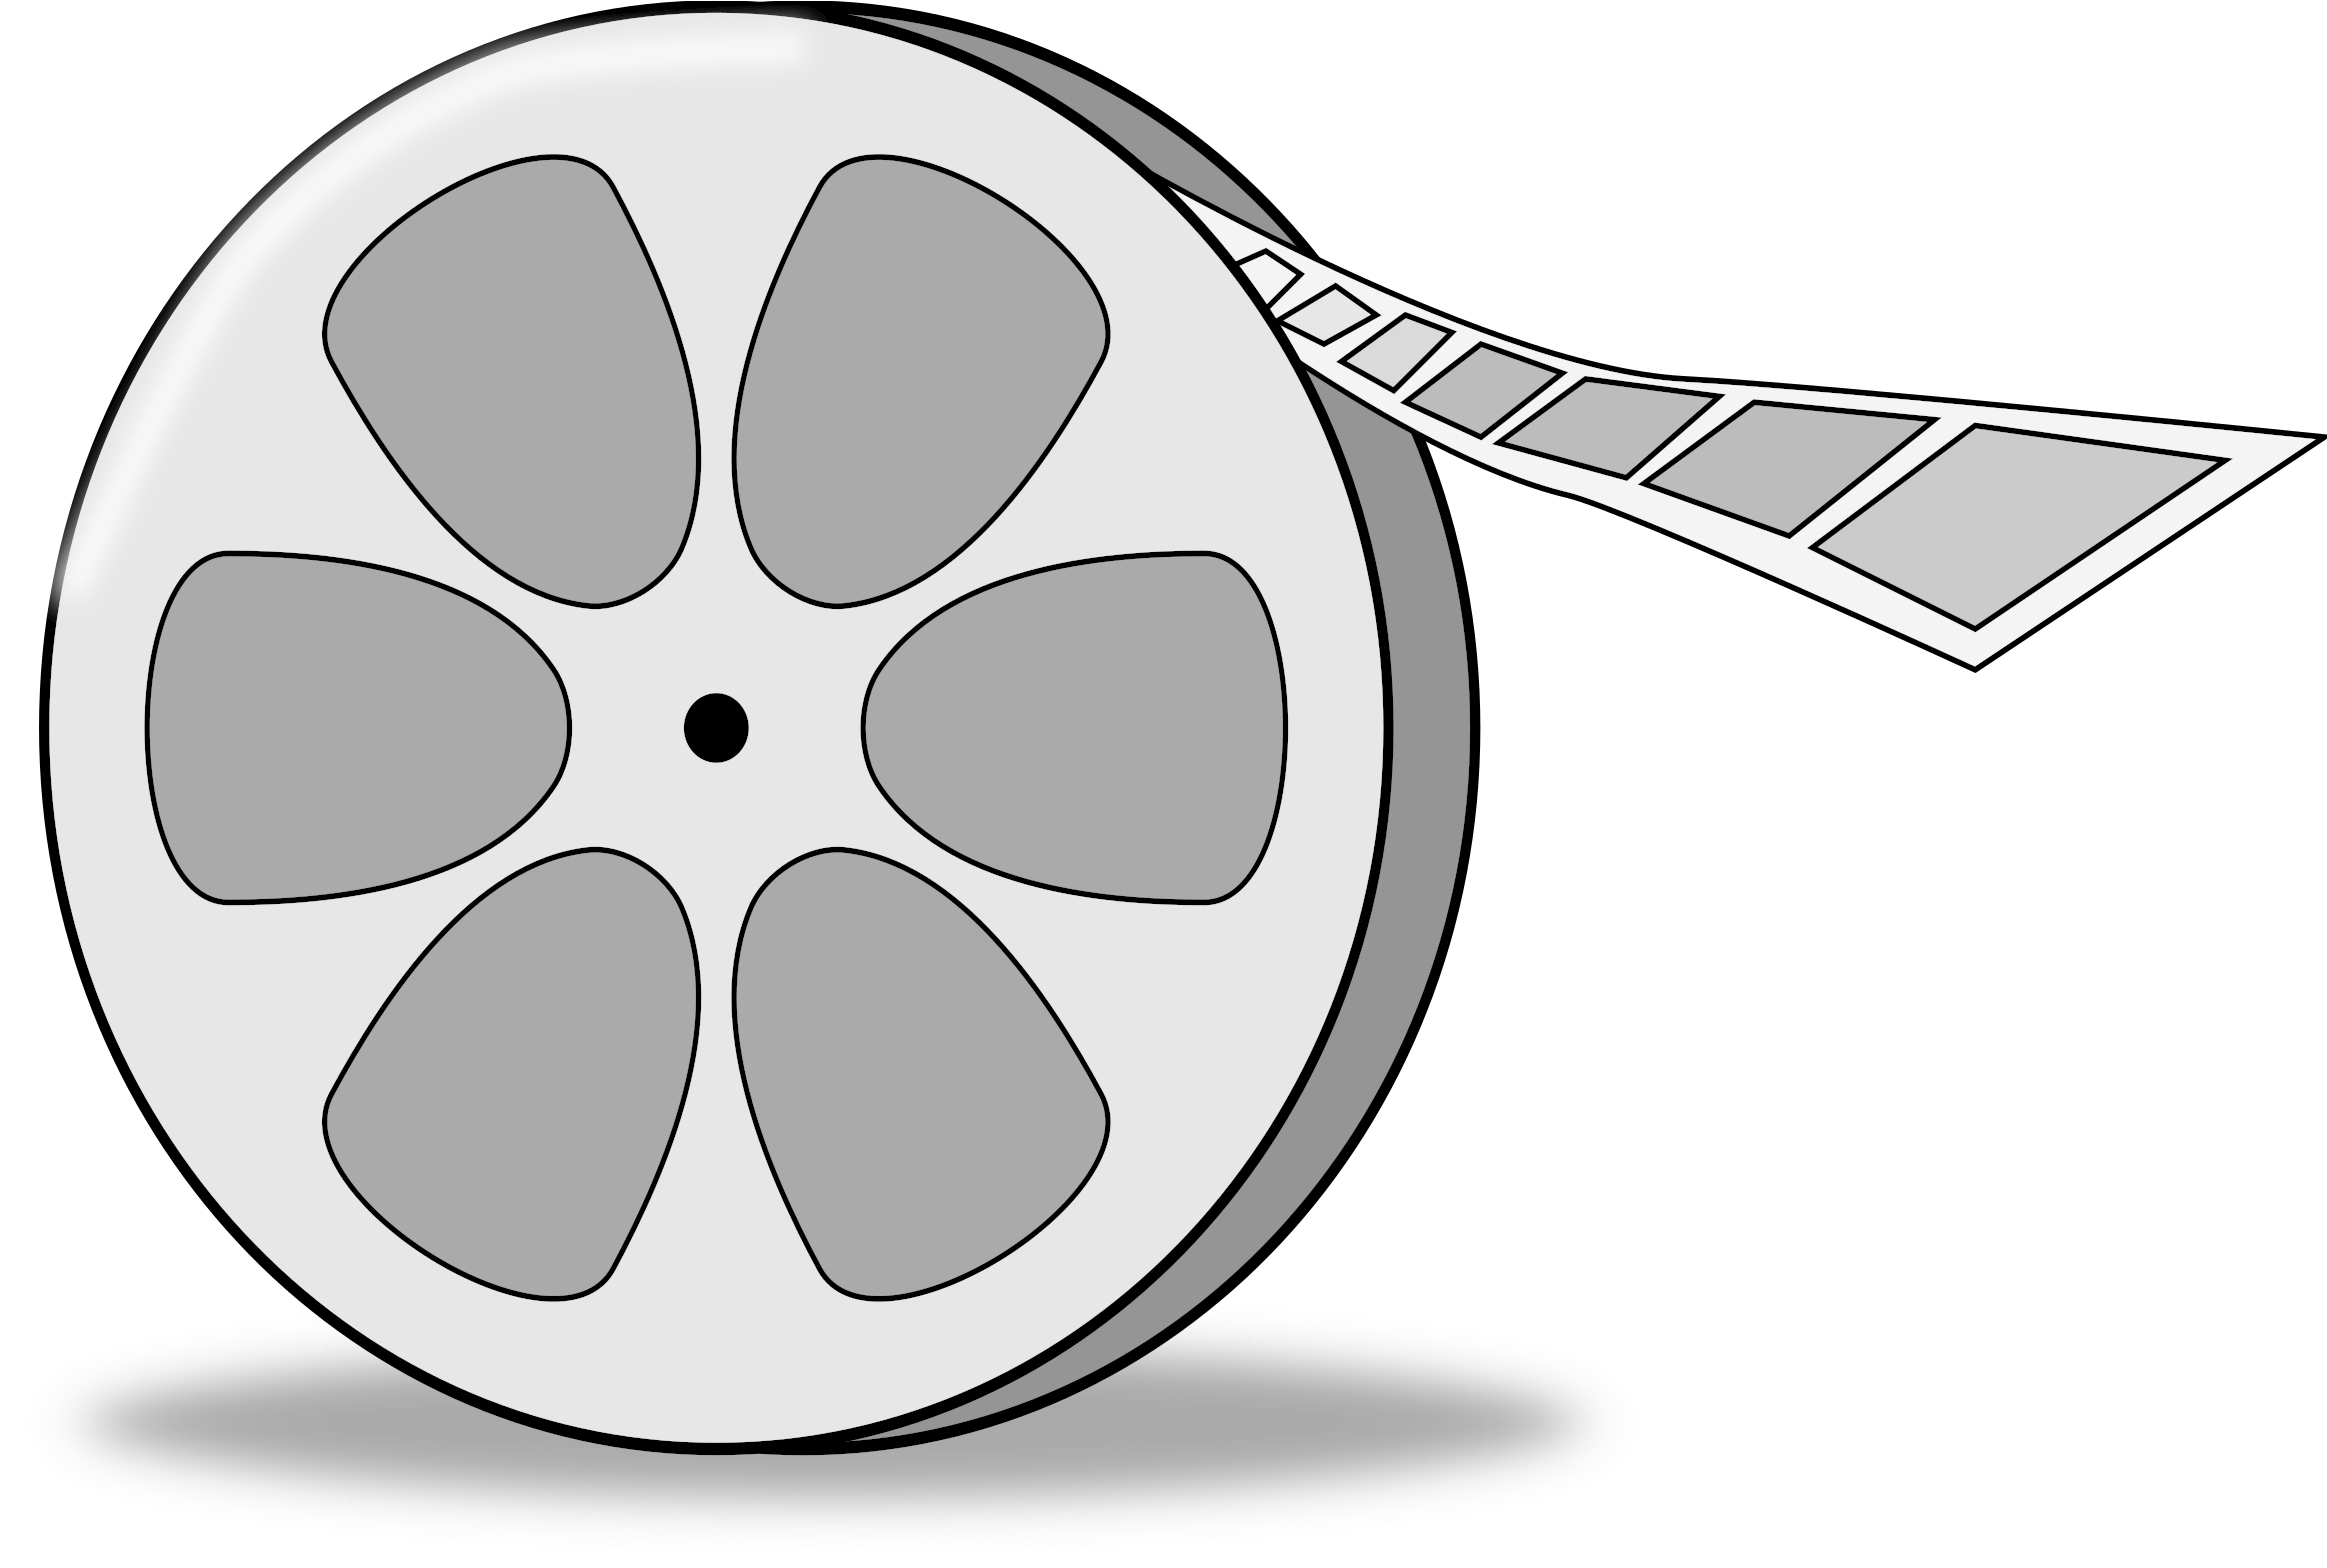 Movie Reel Projector Film Roll PNG Image